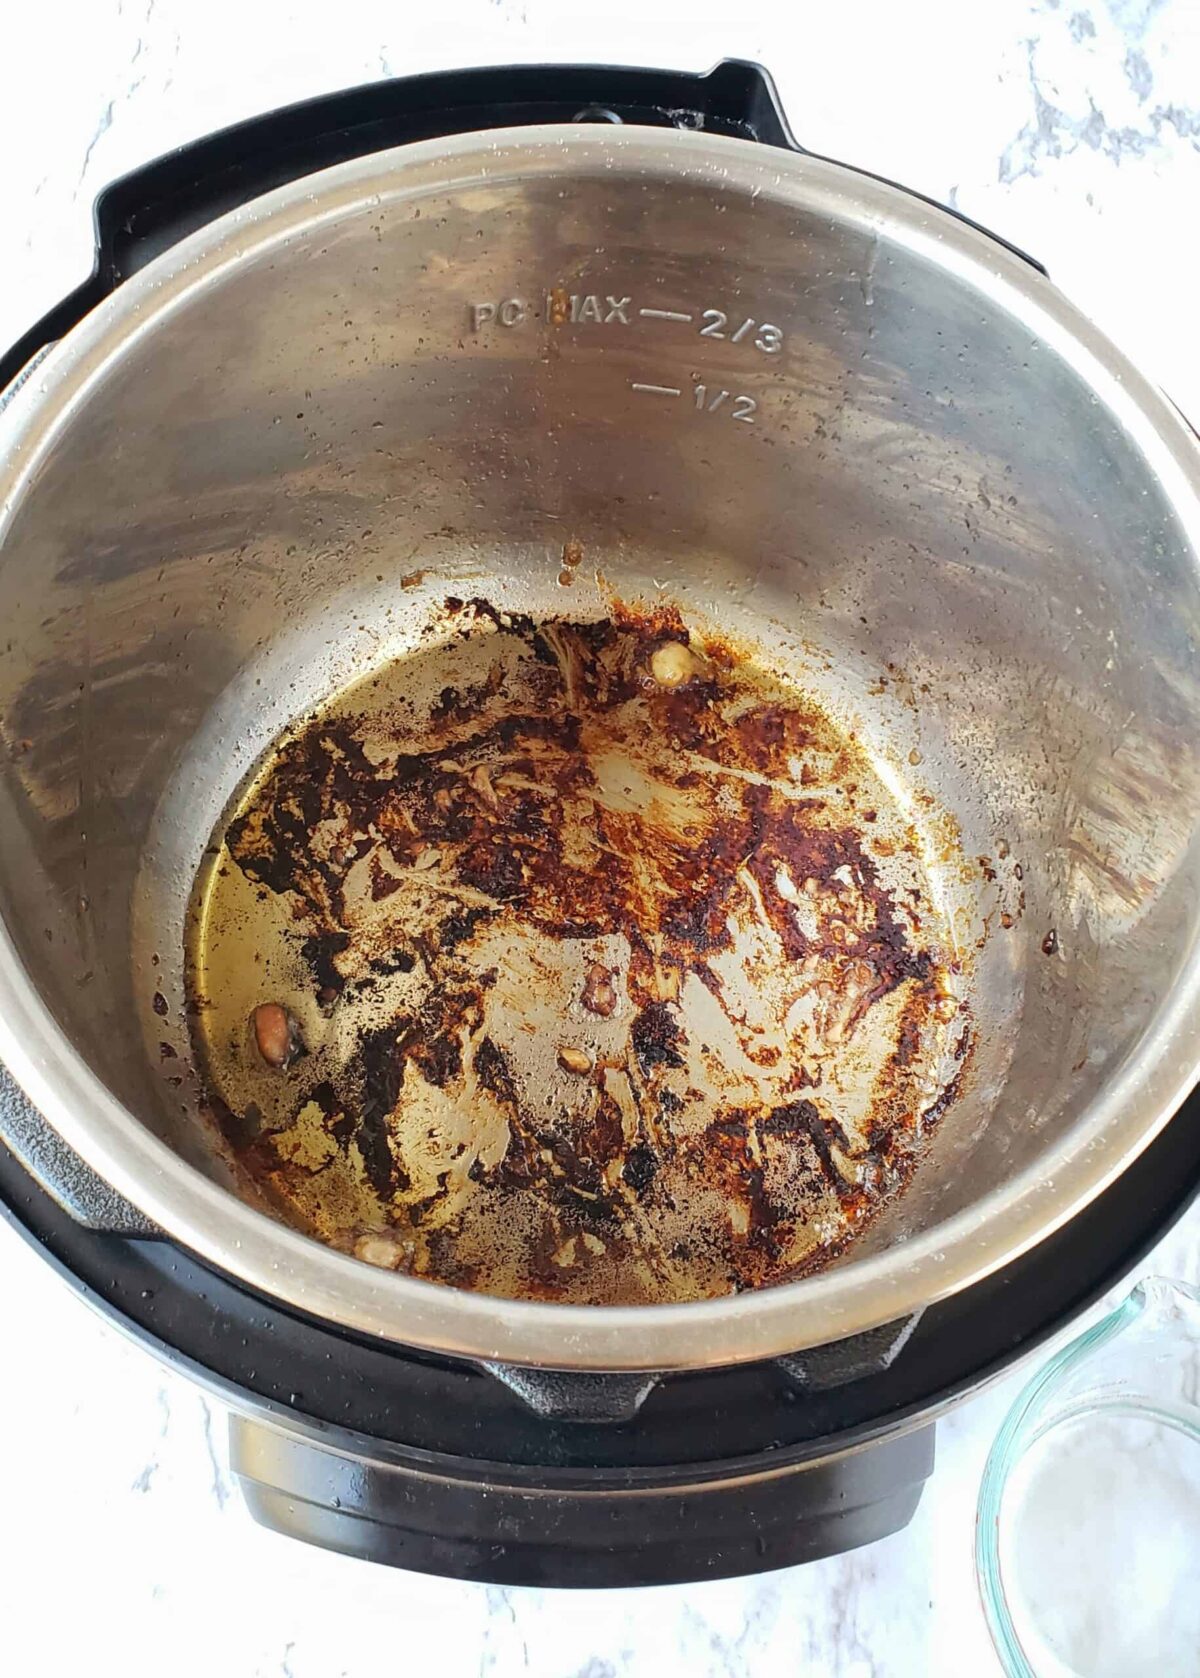 Your Instant Pot pan will look like this after browning the chicken thighs in the pan.